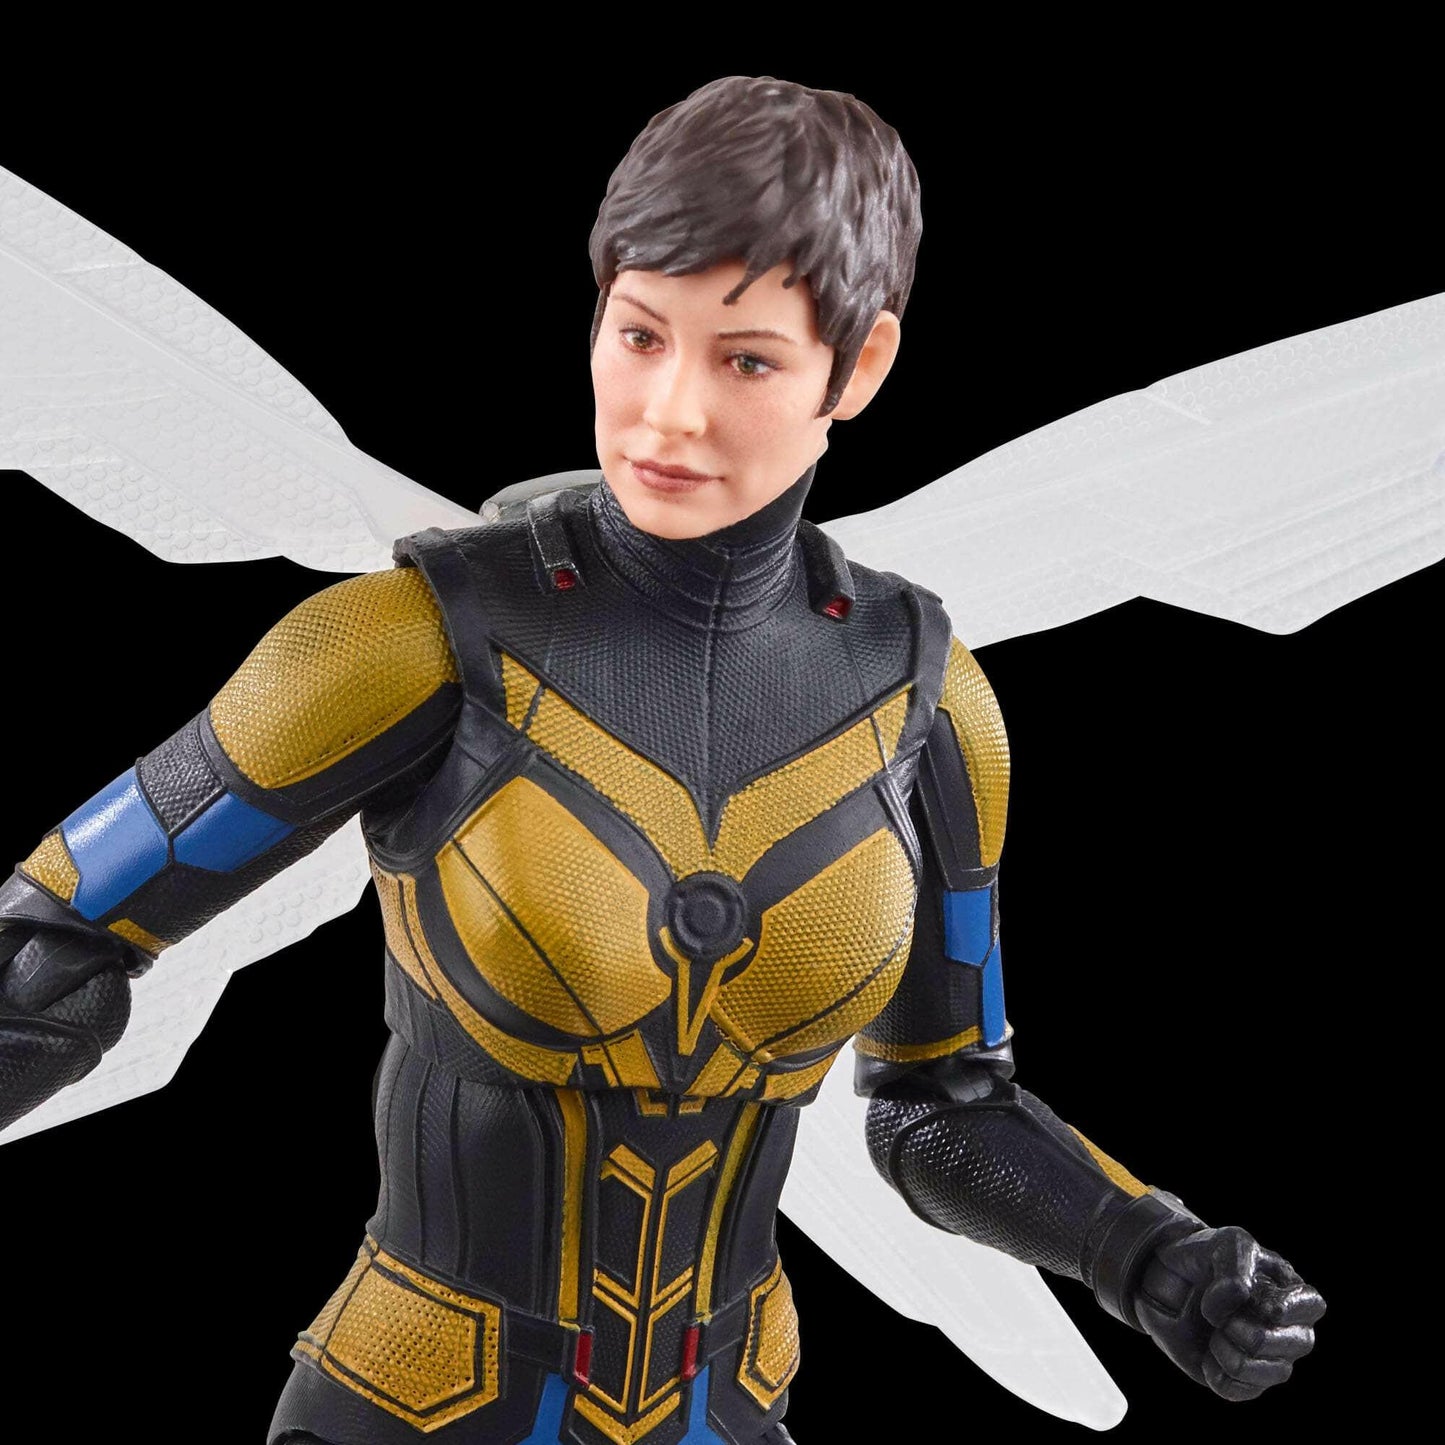 Marvel Legends Ant-Man and the Wasp: Quantumania Actionfigur BAF: Cassie Lang Marvel's Wasp 15cm